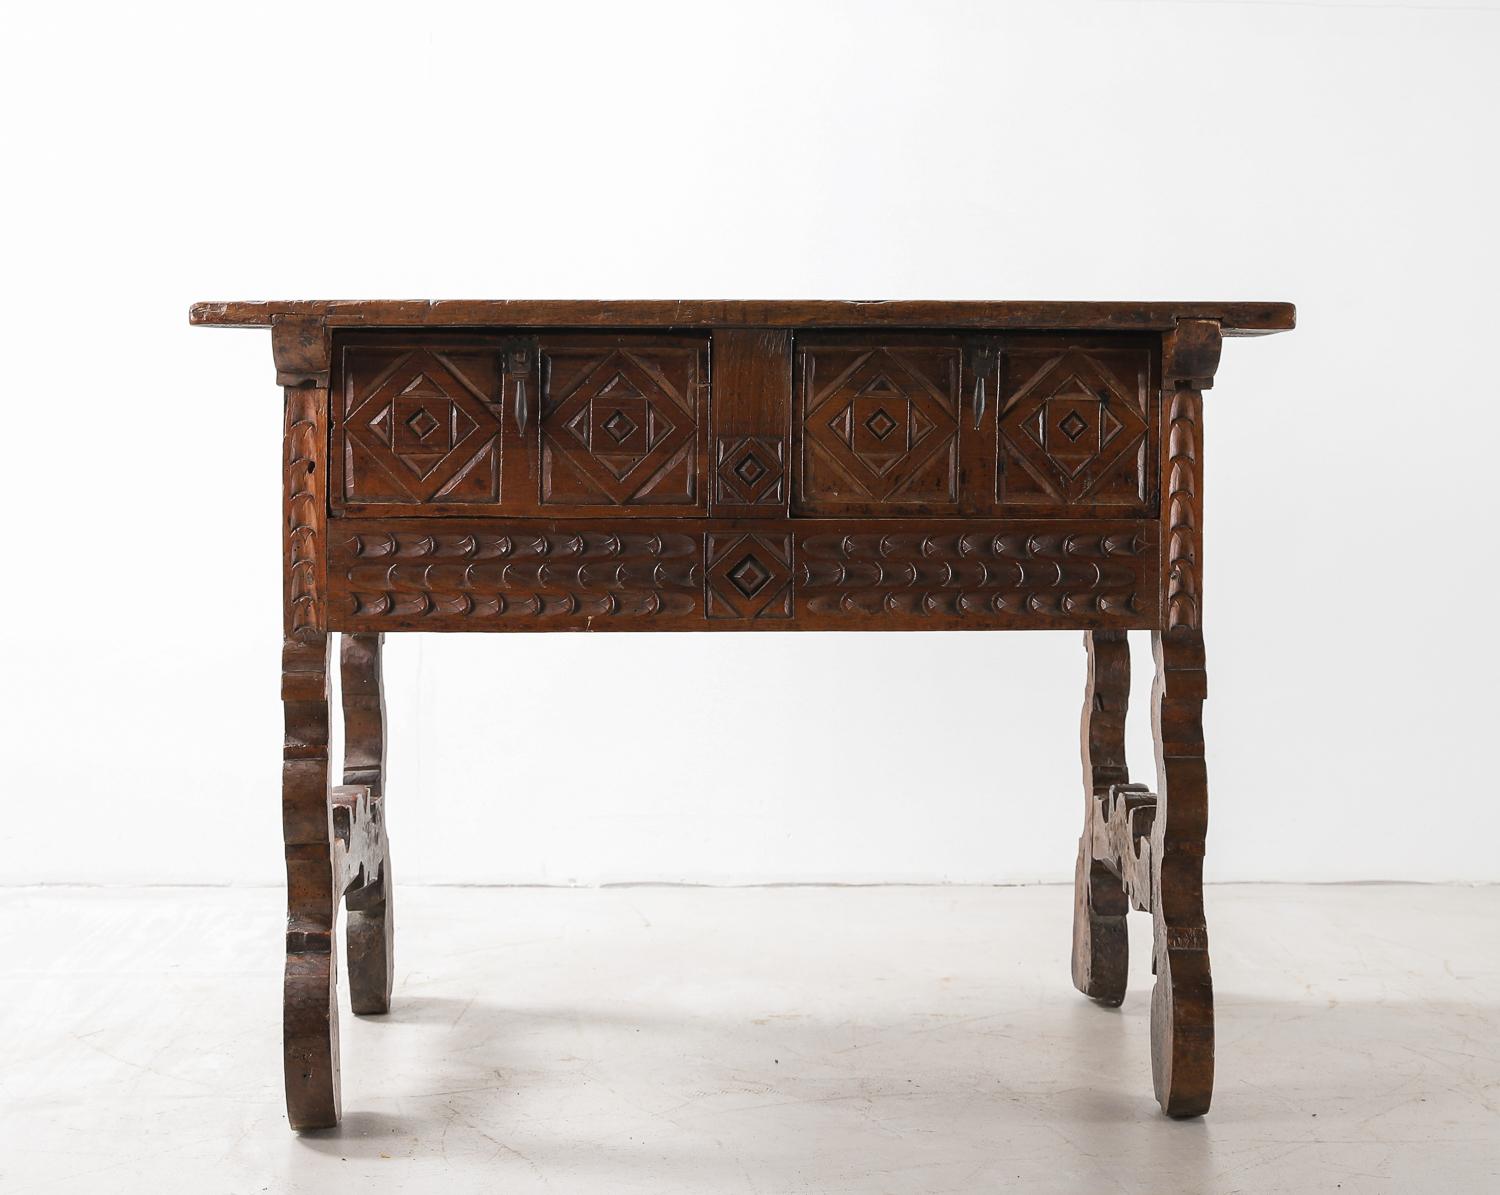 Spanish 18th Century Carved Walnut Table with Original Iron Pulls and Lyre Legs For Sale 6